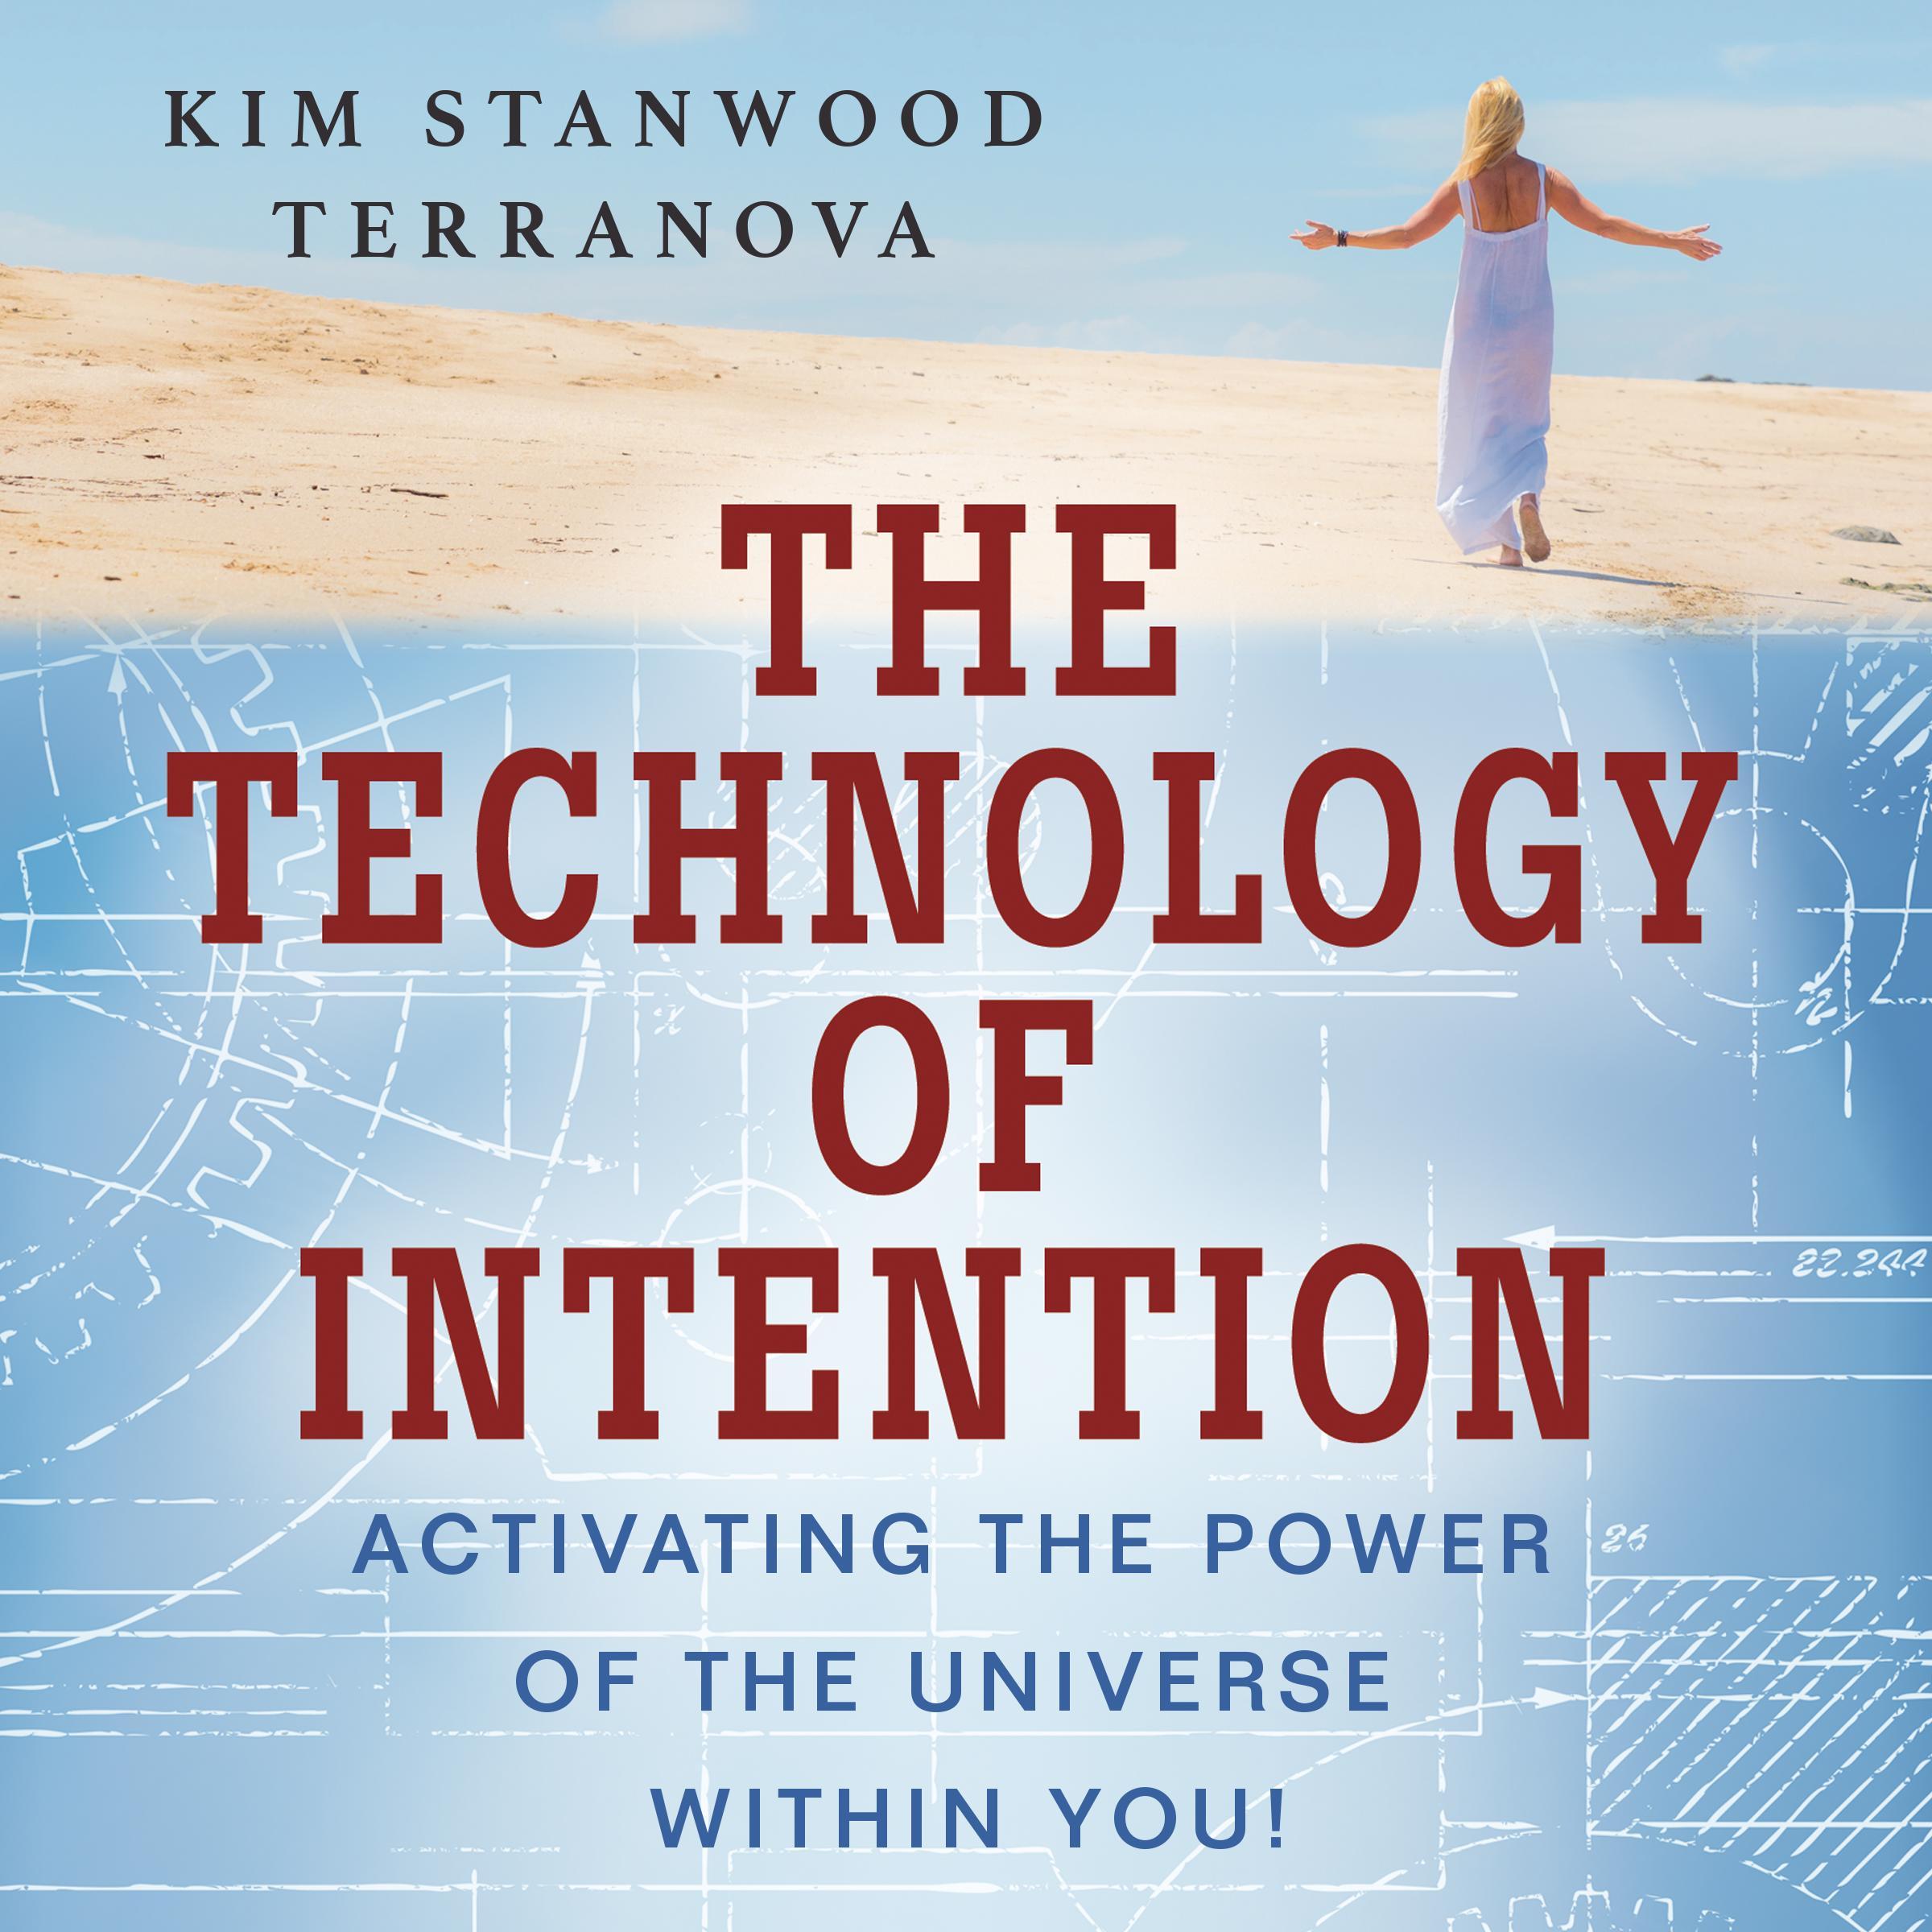 The Technology of Intention